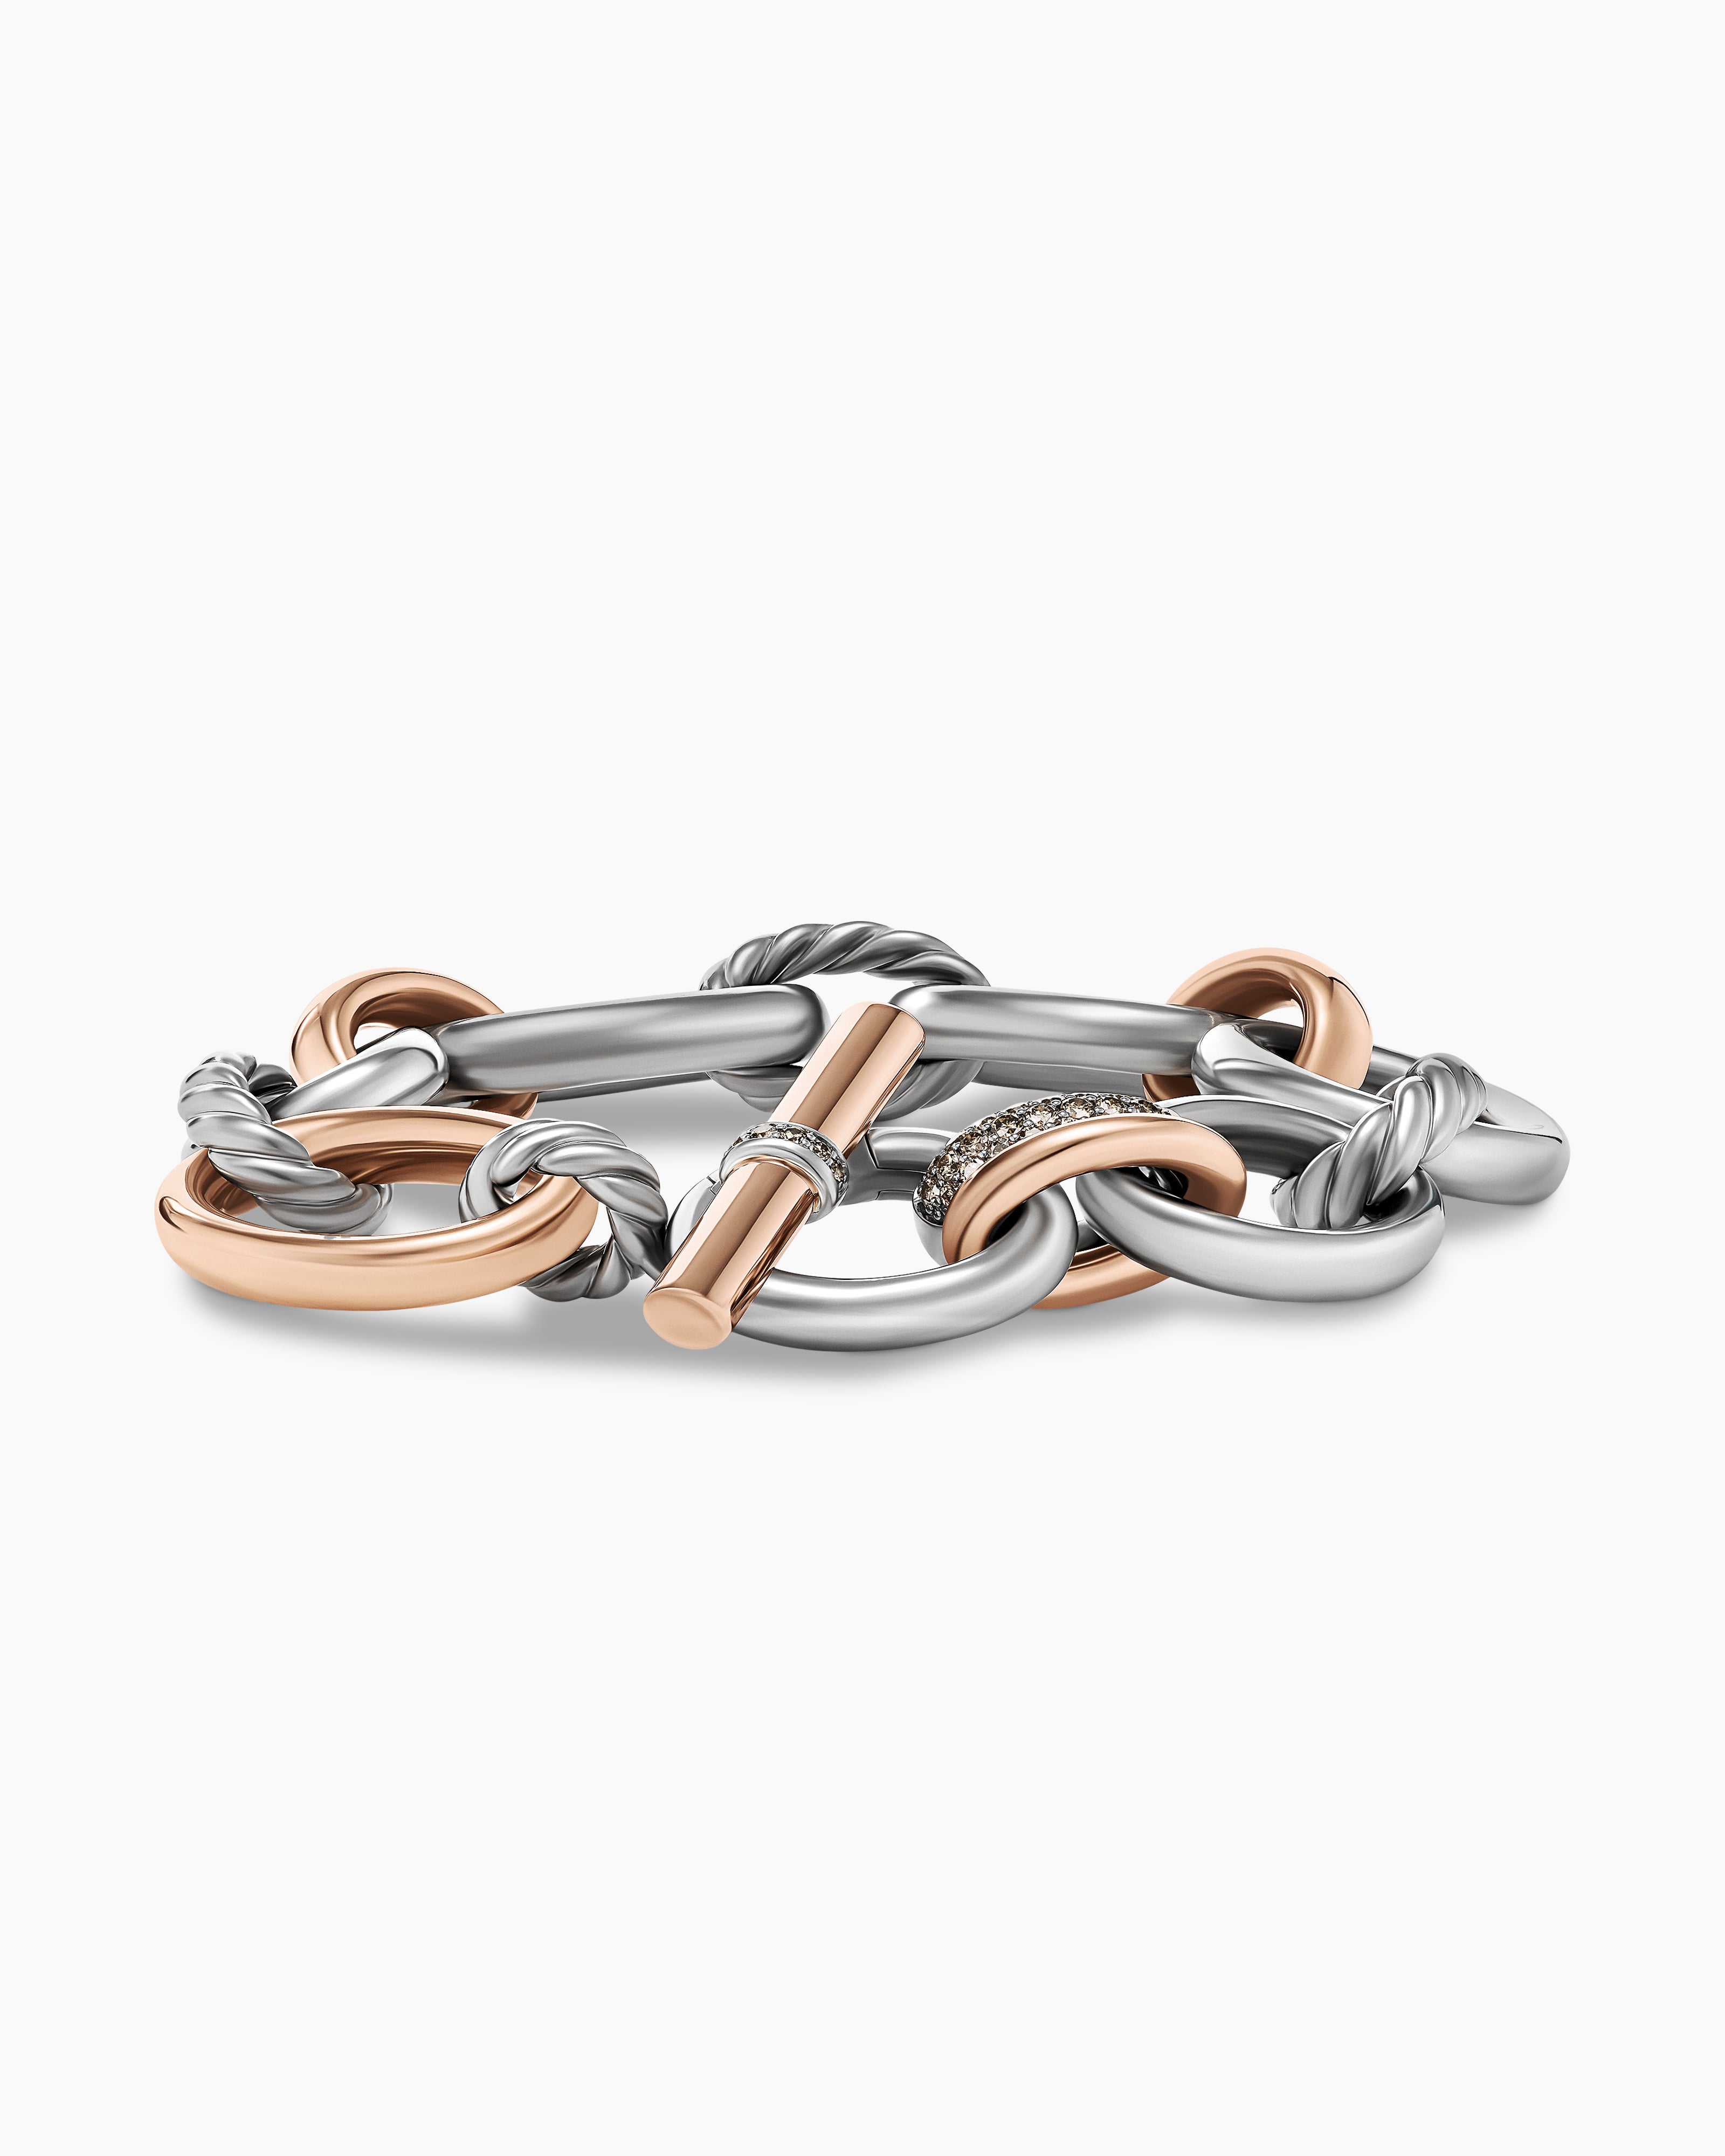 DY Mercer™ Melange Chain Bracelet  Sterling Silver with 18K Rose Gold and Diamonds, 25mm